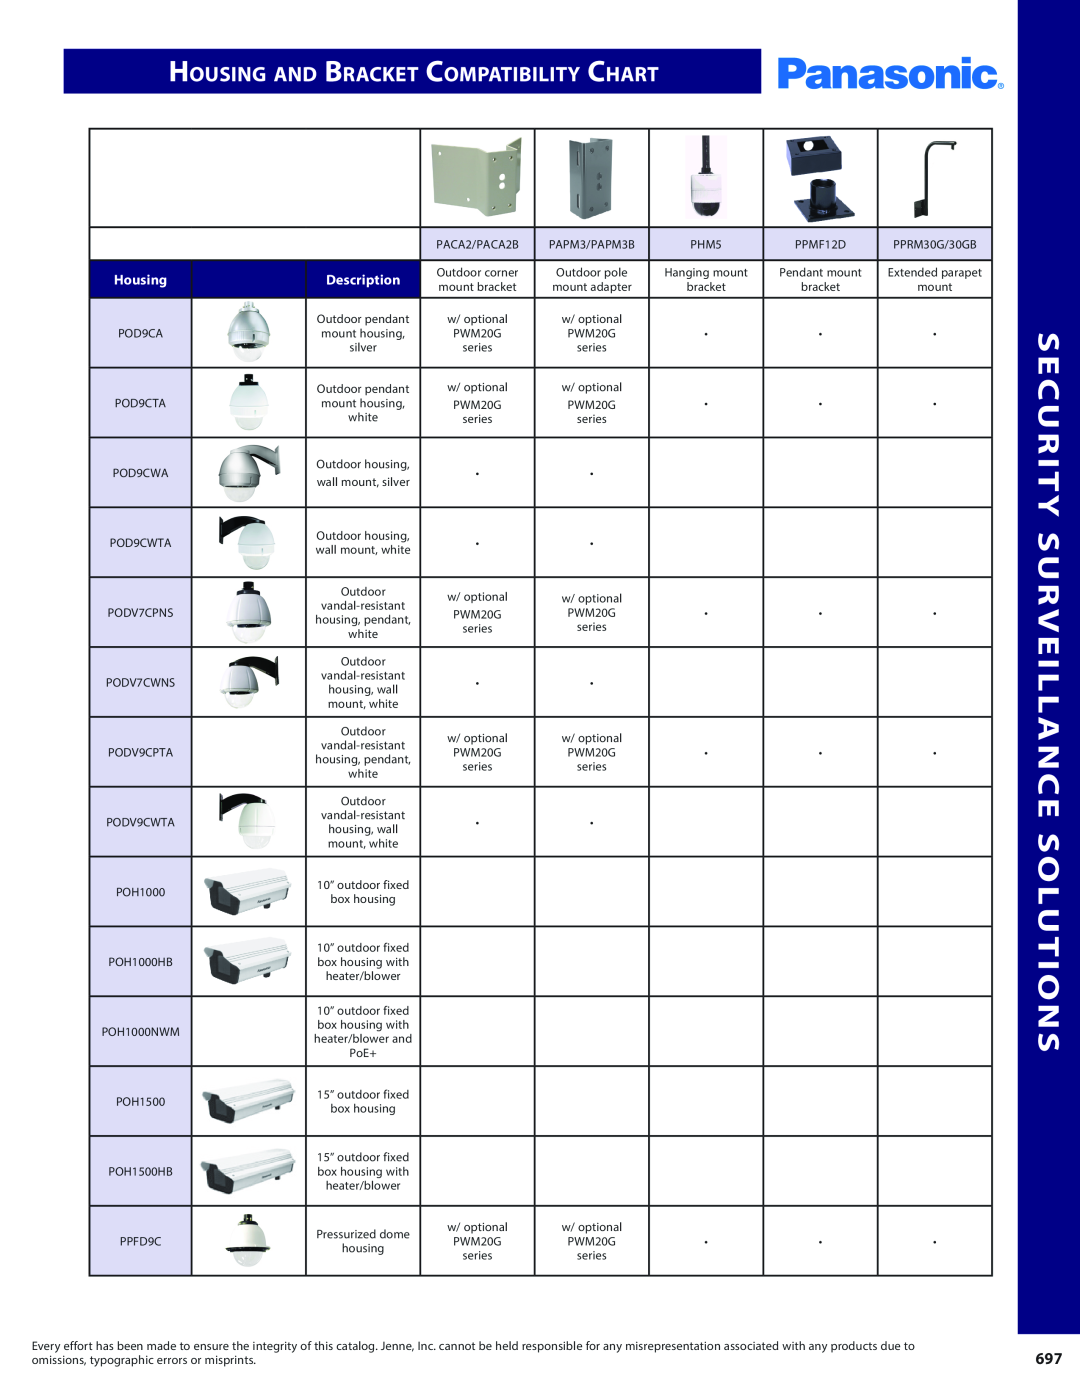 Panasonic PMPU2000 manual Housing and Bracket Compatibility Chart, Security Surveillance Solutions 